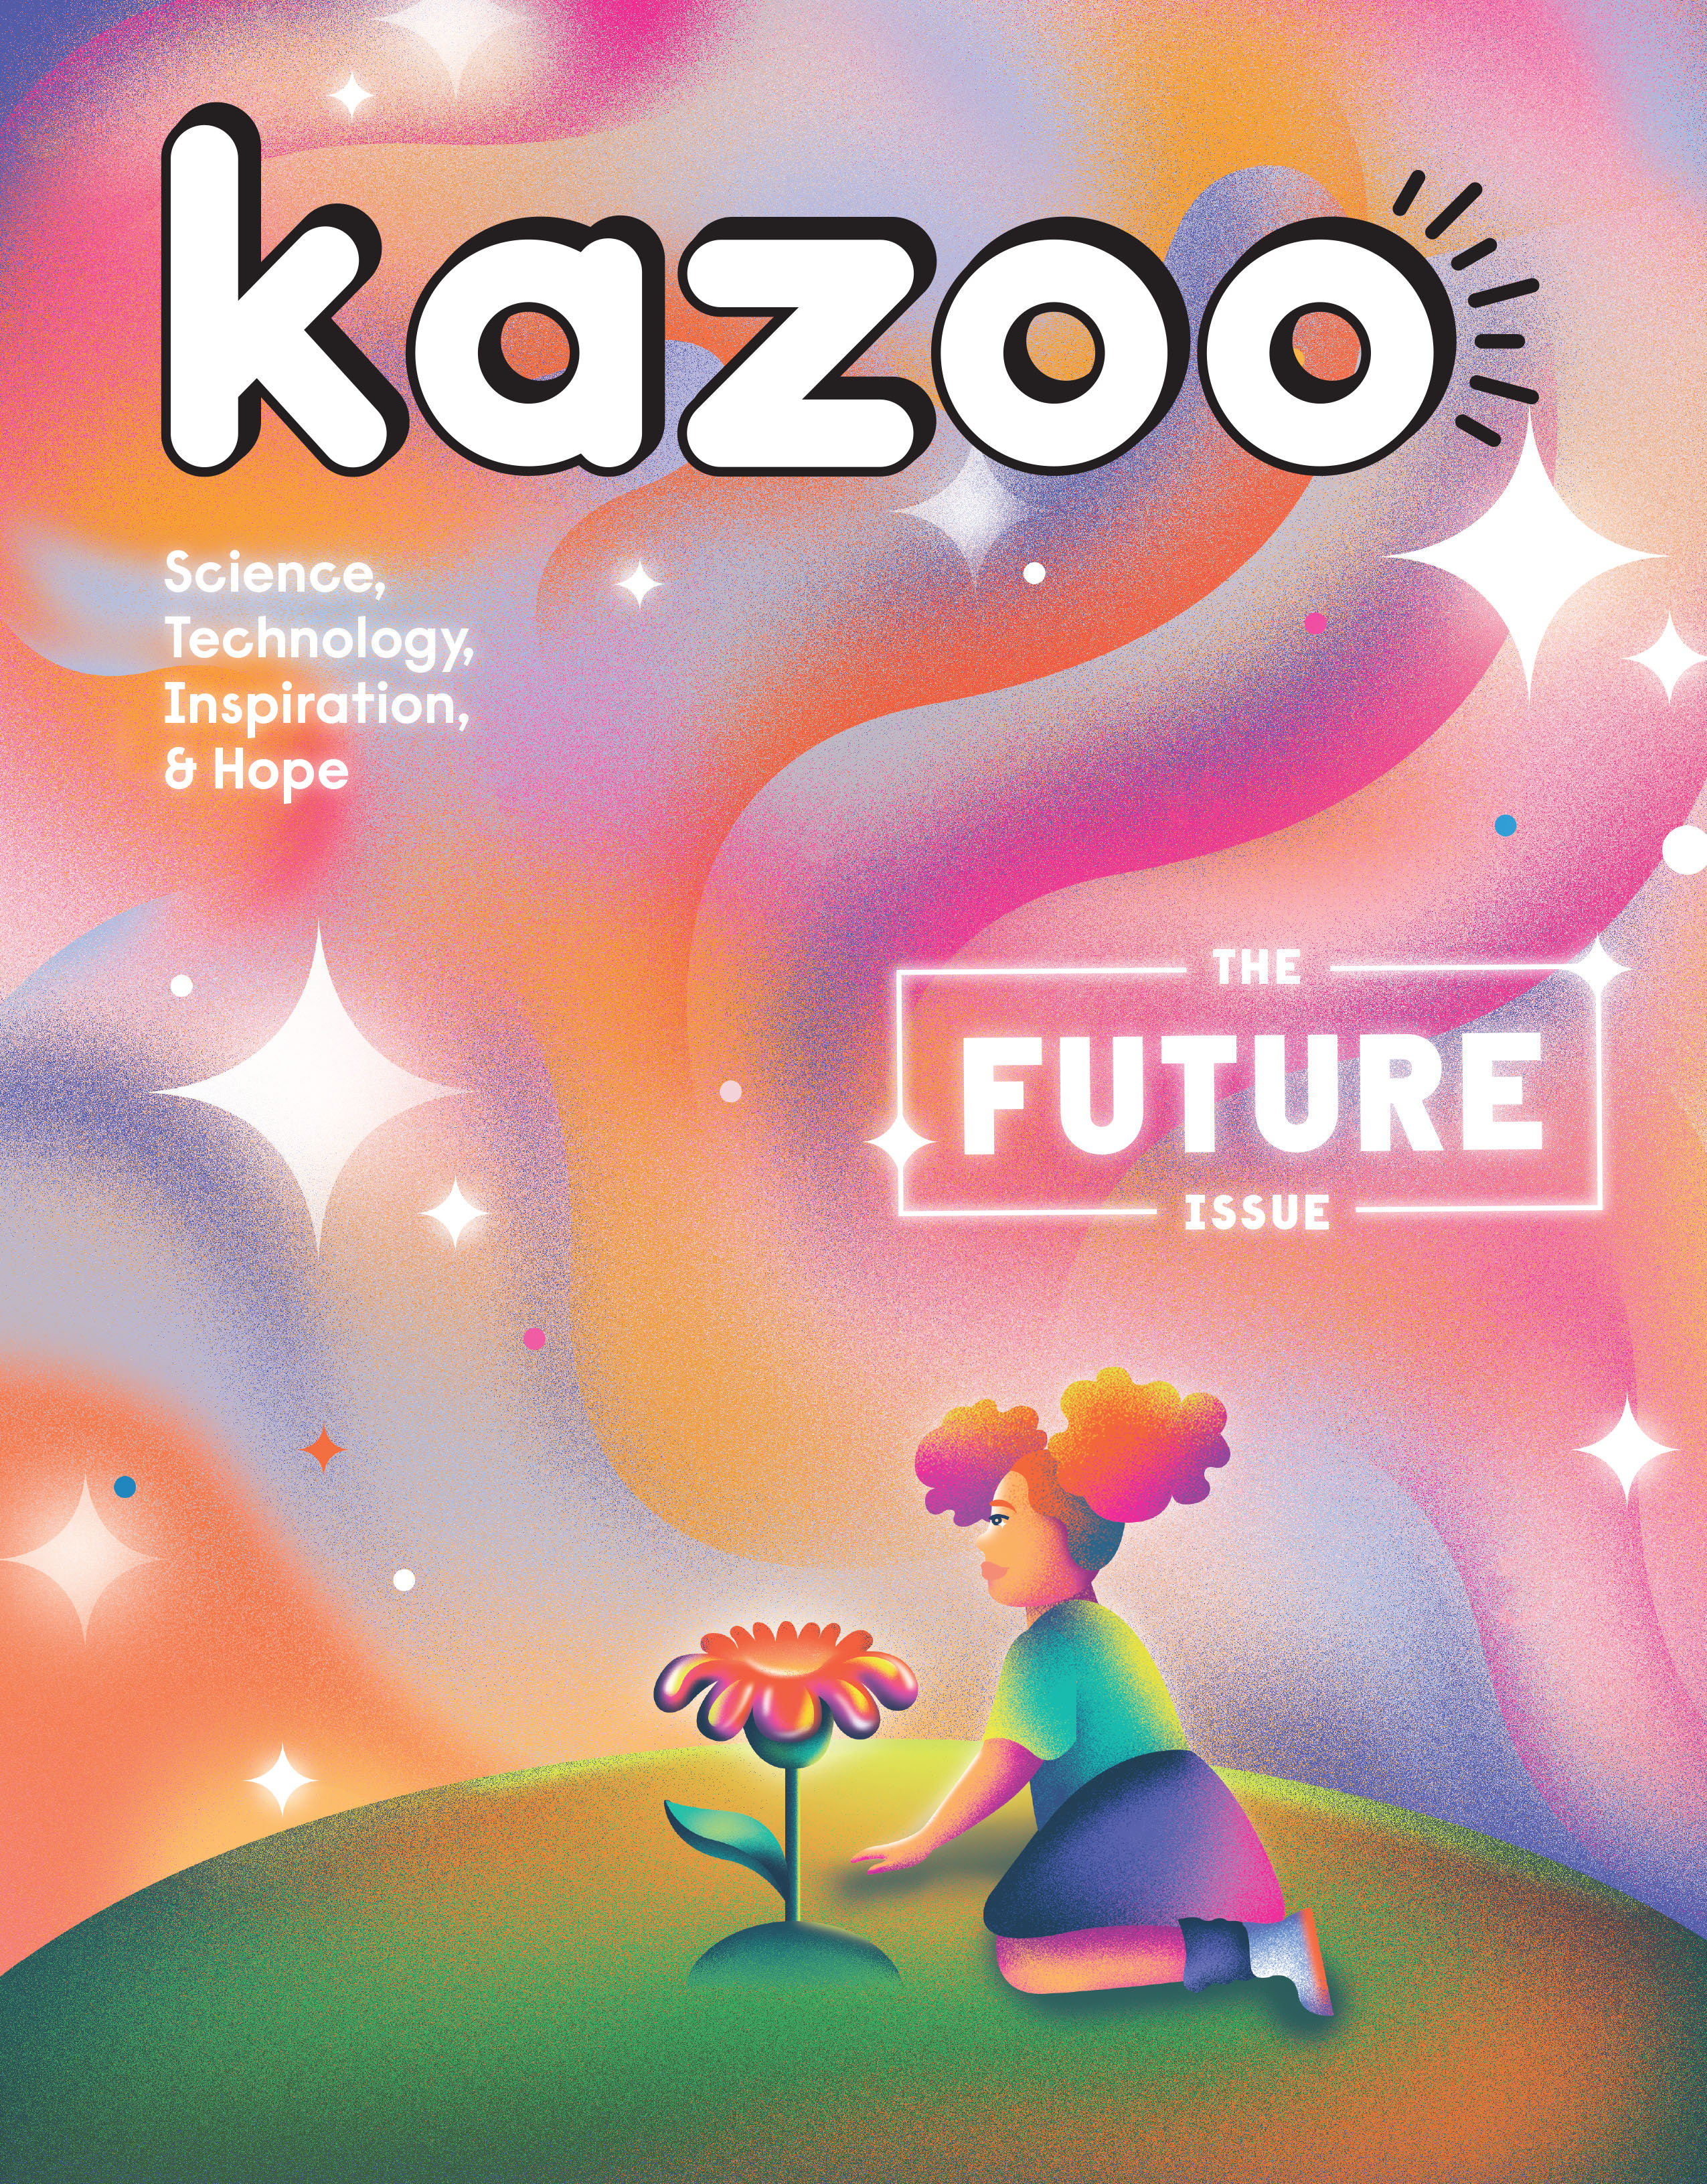 Kazoo - General Excellence, Special Interest